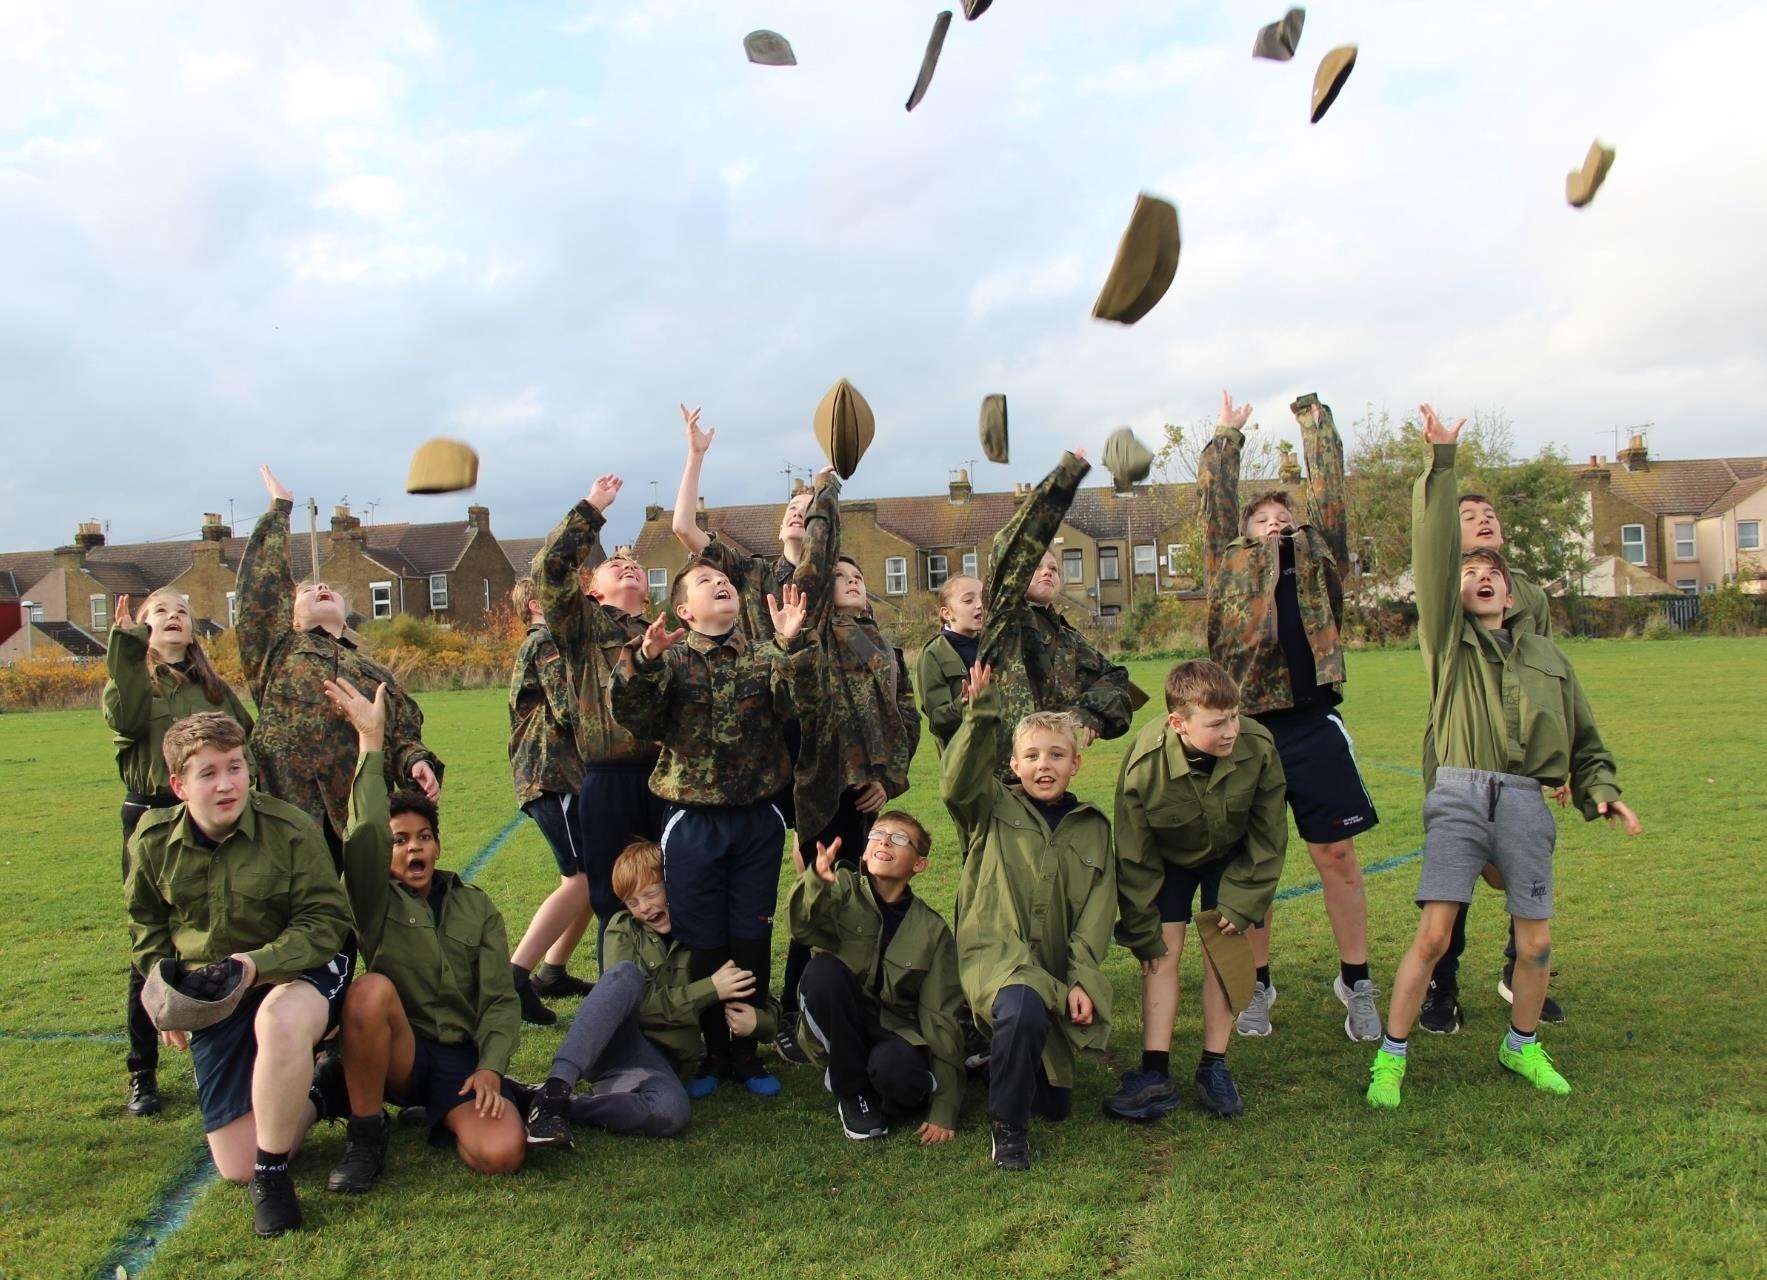 Hats off: Students from Sheppey's Oasis Academy recreated the 1914 Christmas Day truce football match in Sheerness (5324696)